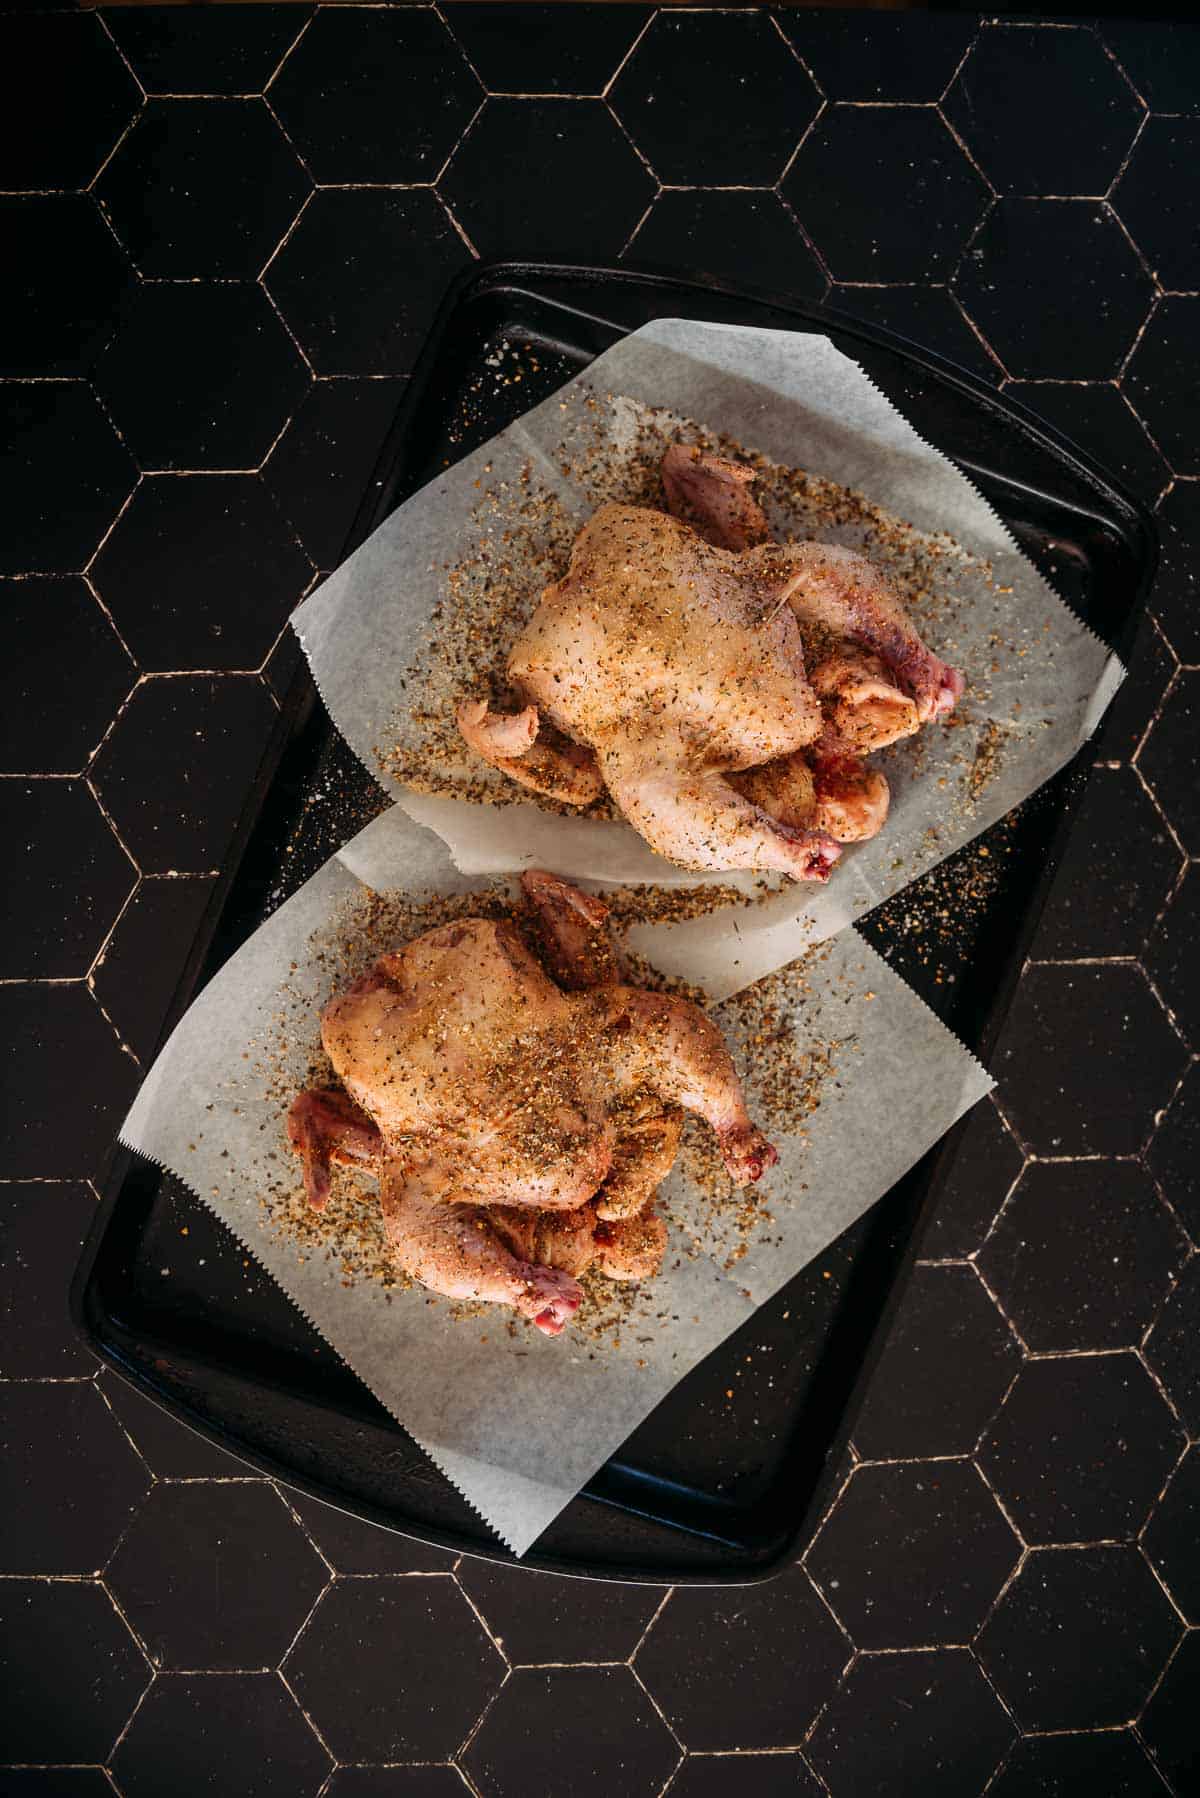 Two cornish game hens on a baking tray.